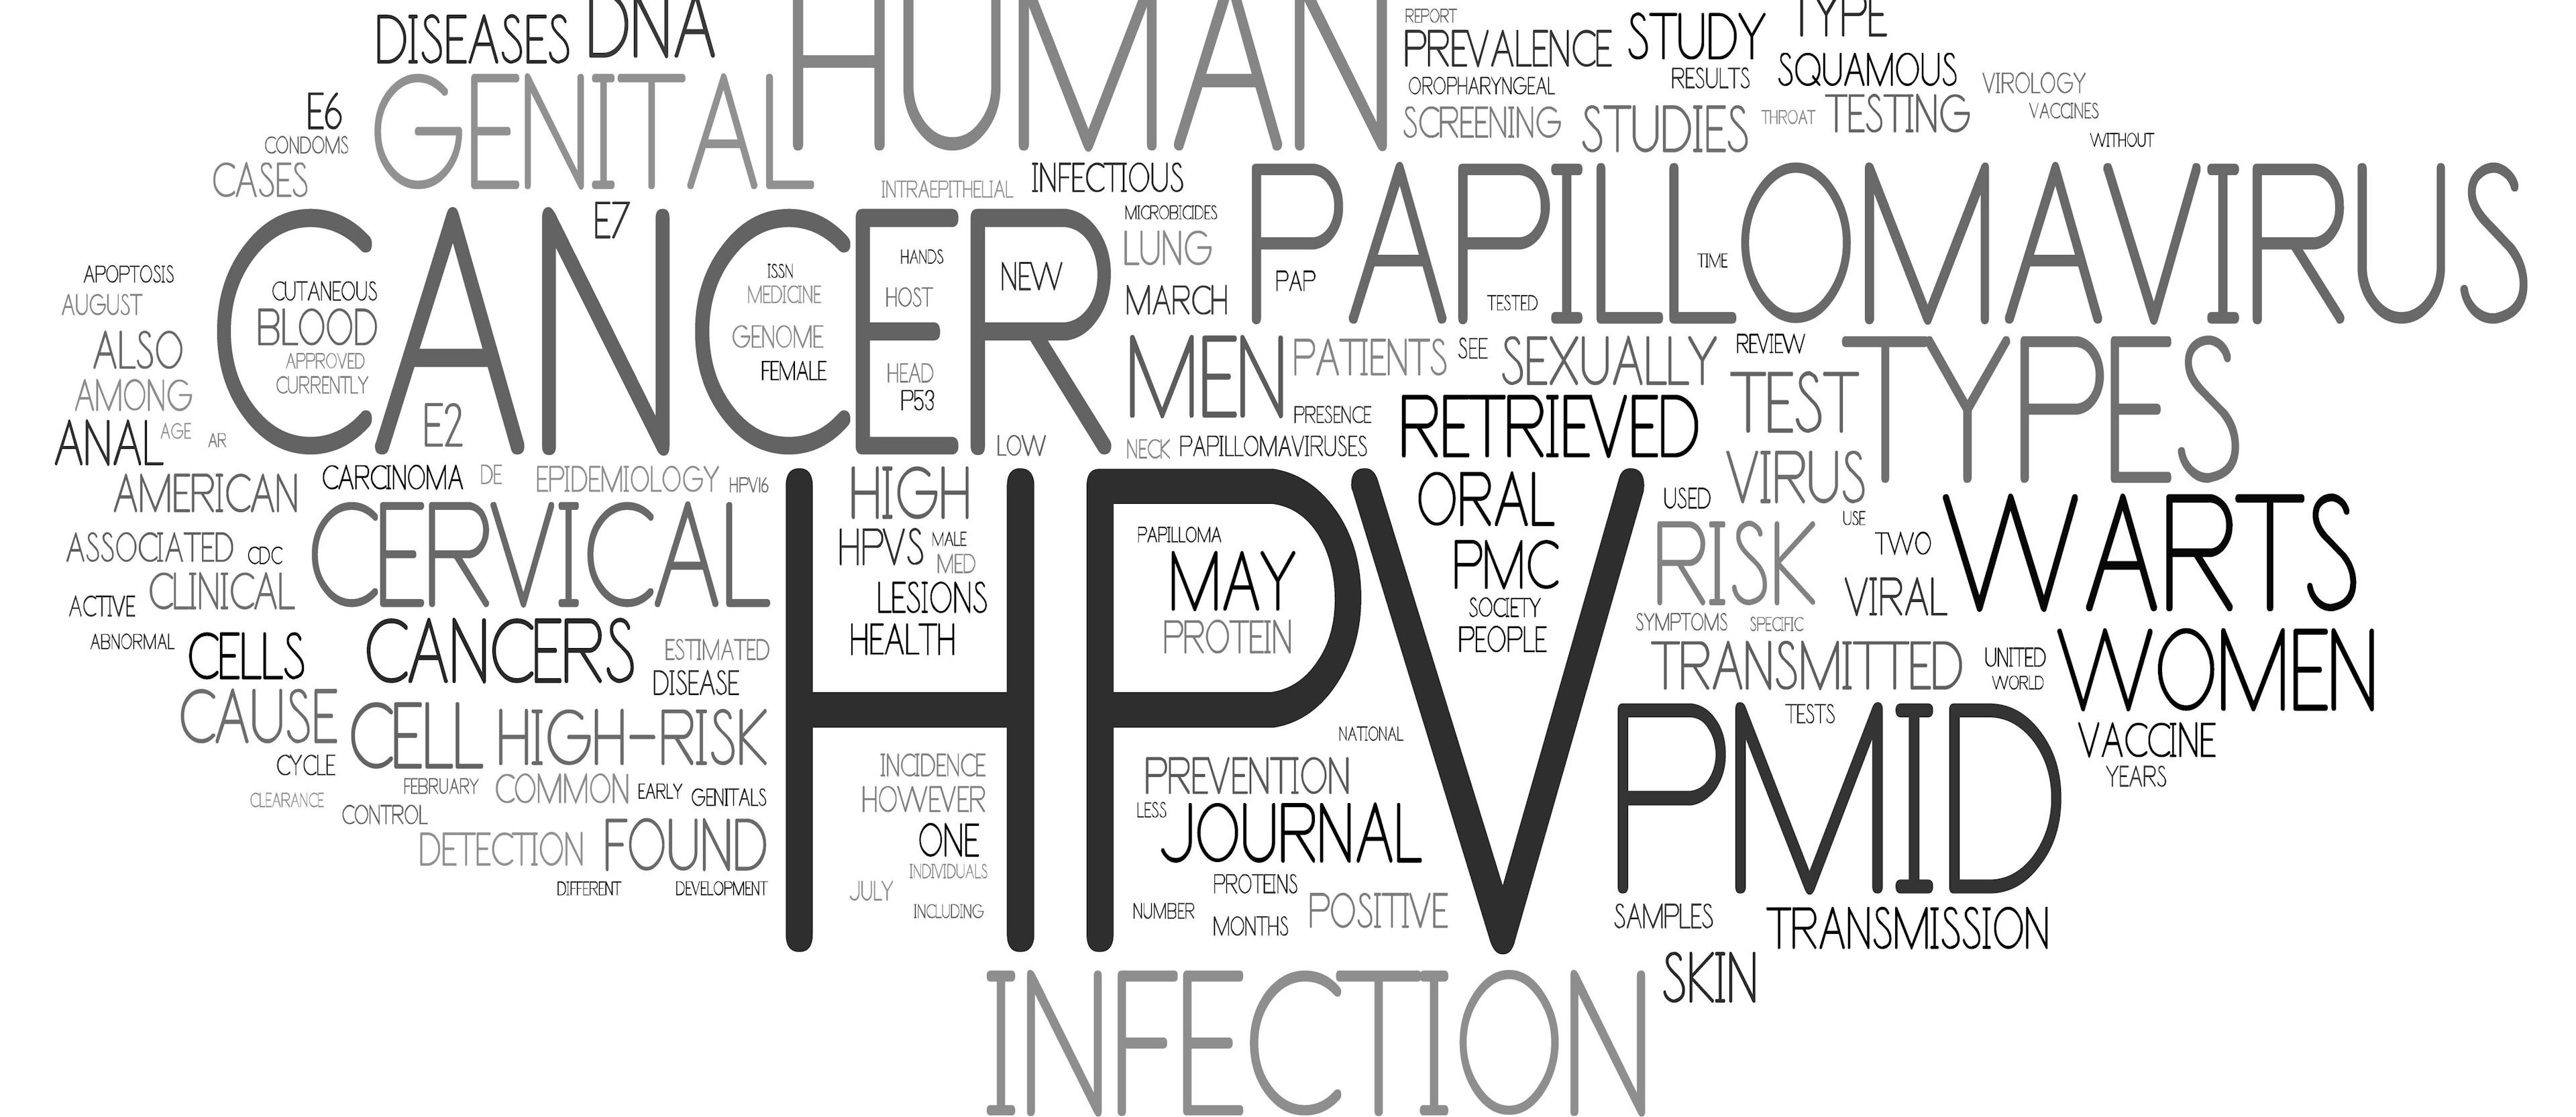 Greater Emphasis on HPV Vaccinations for Boys Could Lead to Better Outcomes